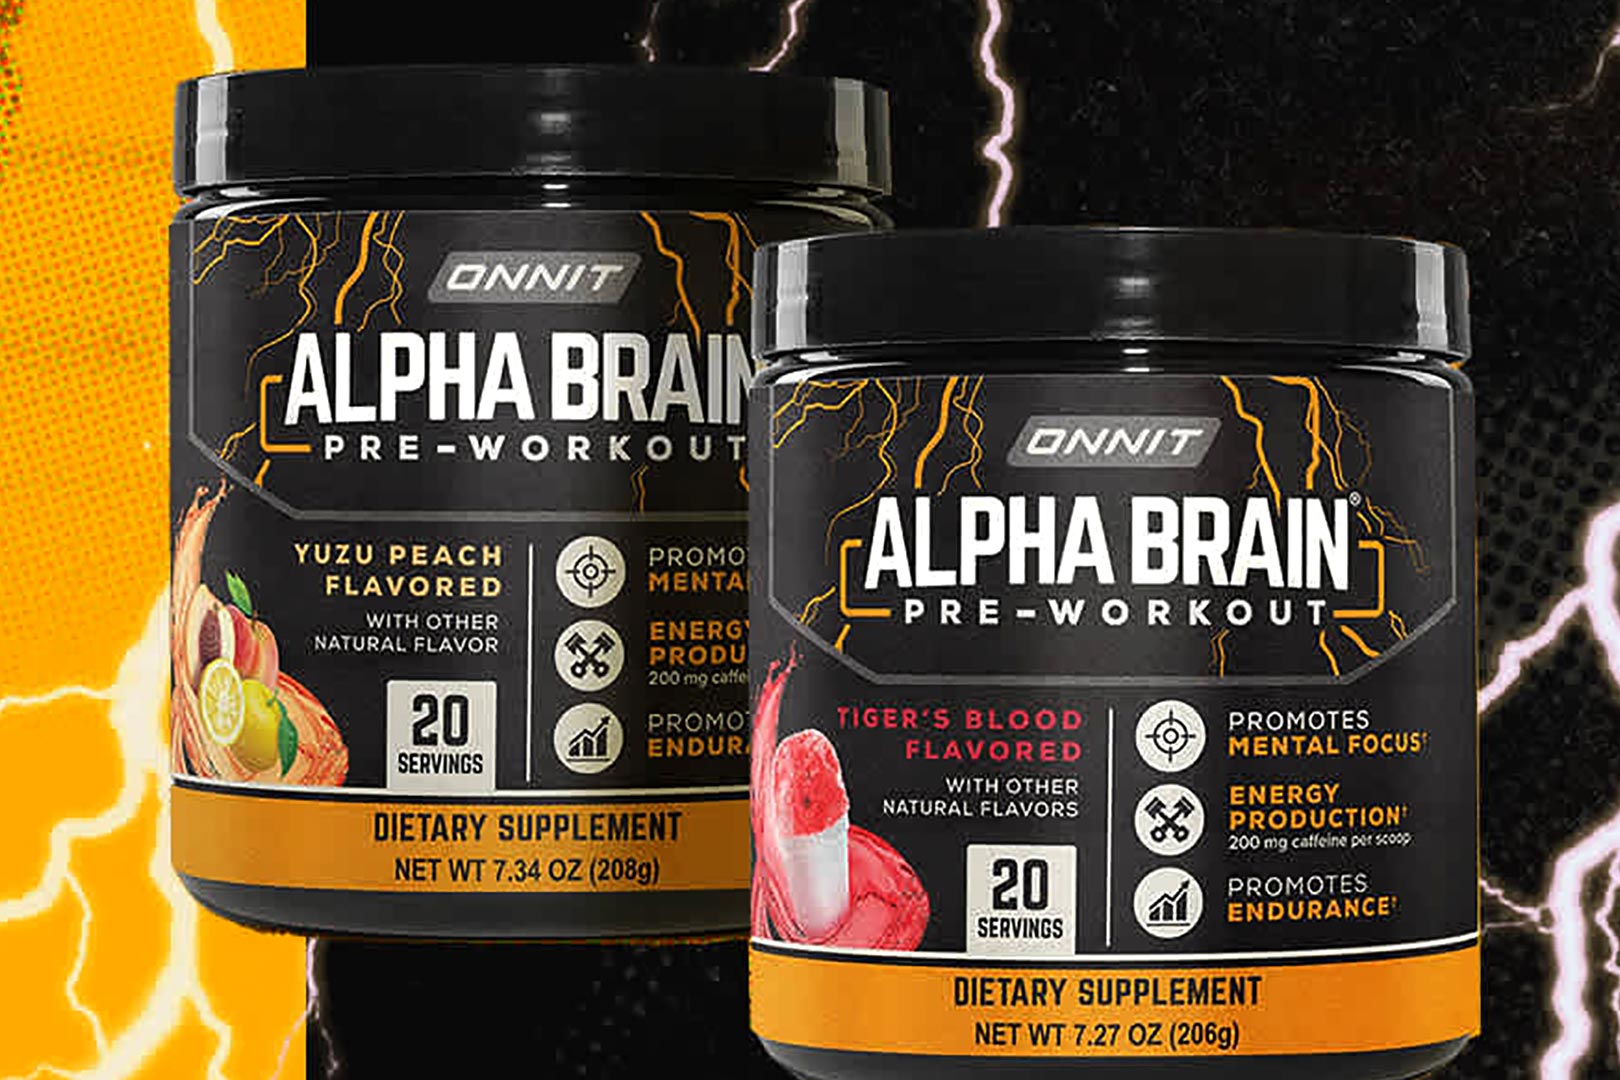 Onnit adds performance and pumps for its Apha Brain Pre-Workout